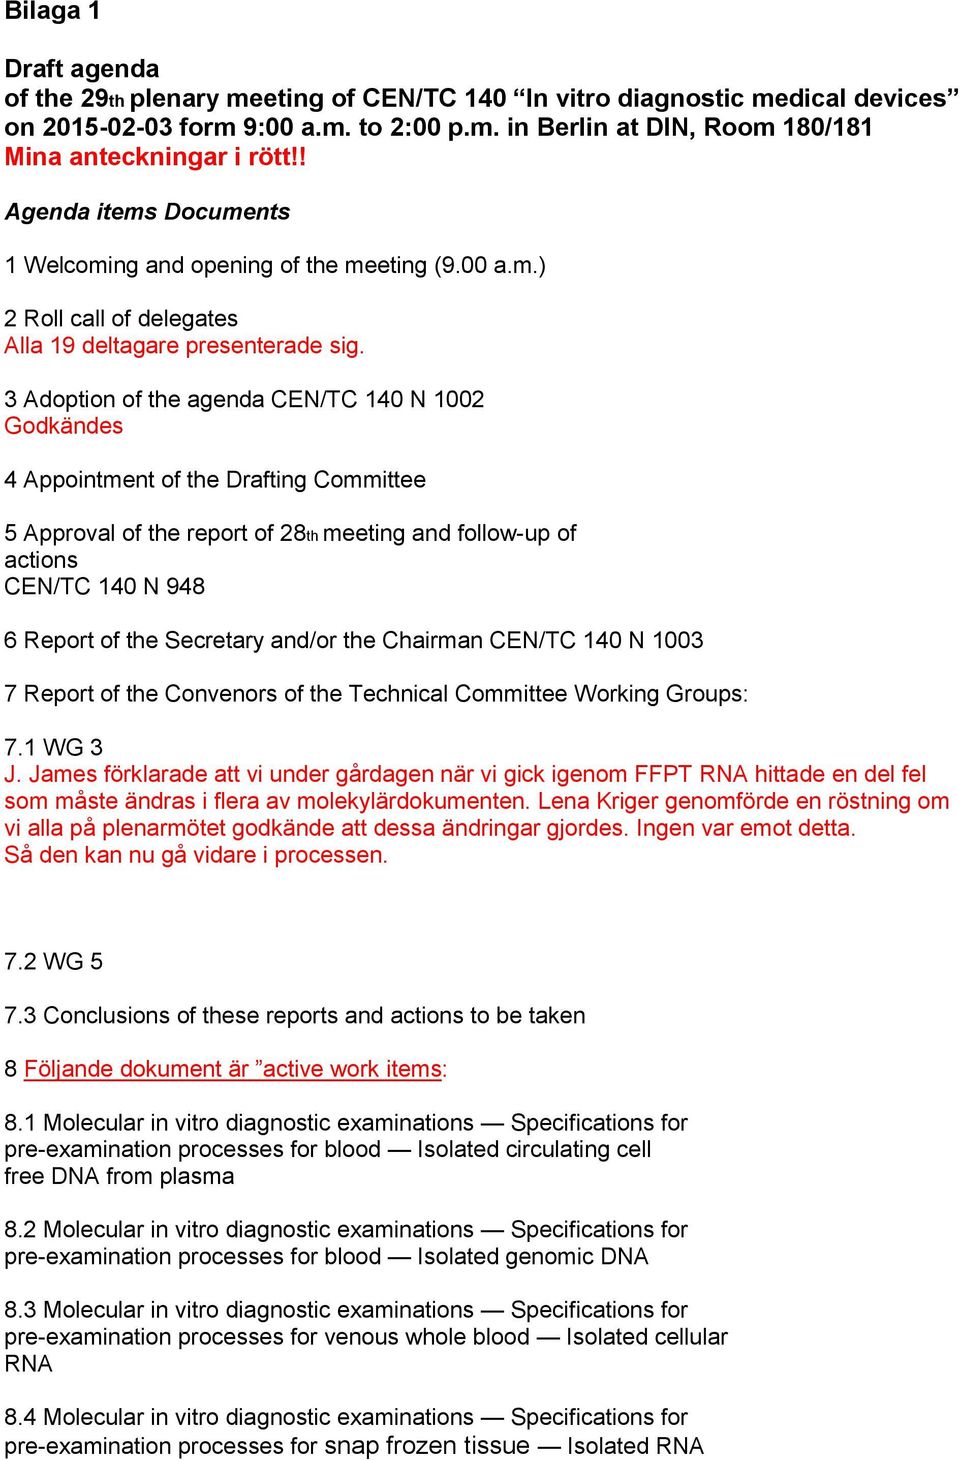 3 Adoption of the agenda CEN/TC 140 N 1002 Godkändes 4 Appointment of the Drafting Committee 5 Approval of the report of 28th meeting and follow-up of actions CEN/TC 140 N 948 6 Report of the